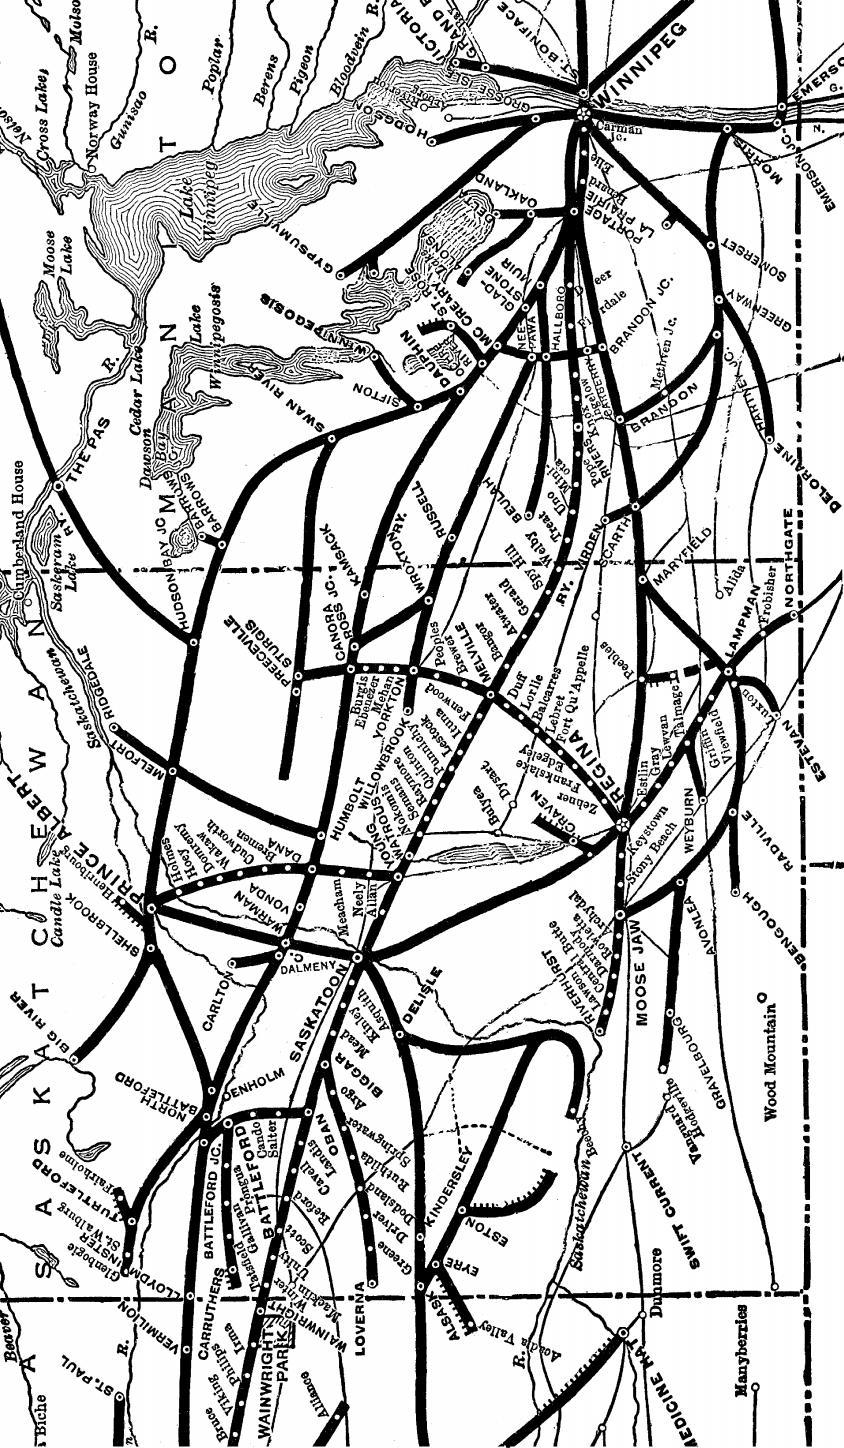 Map derived from 1924 Canadian National Railways Public Timetable